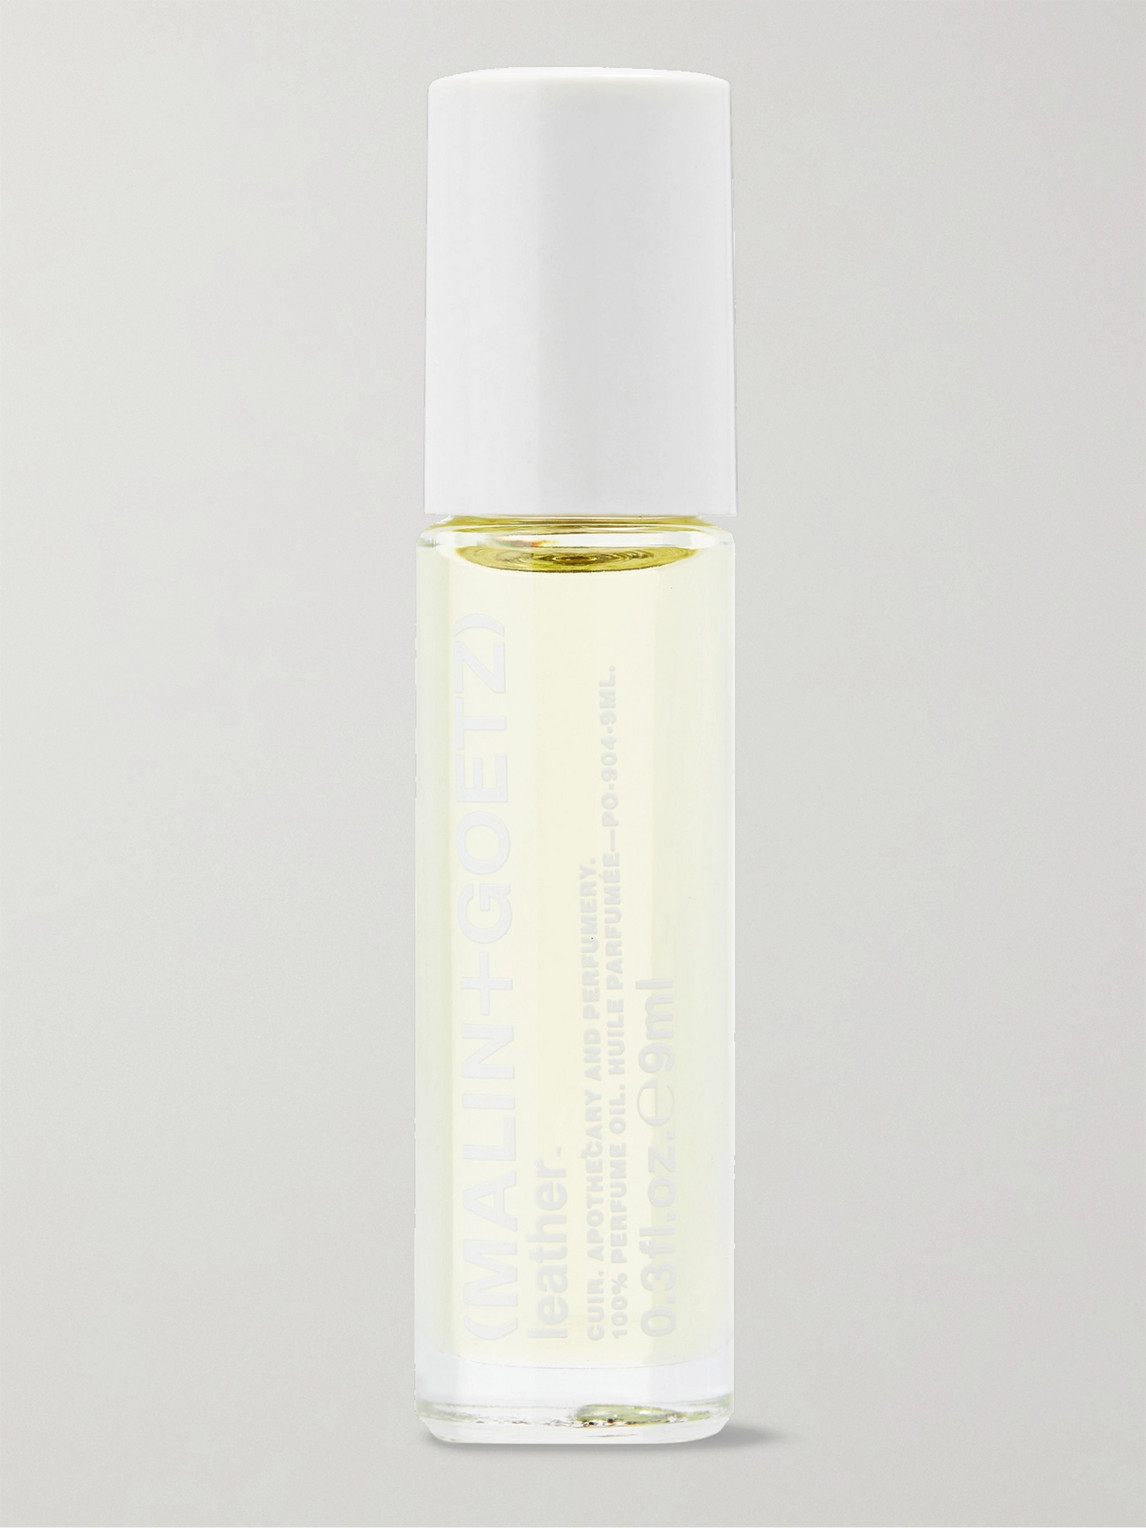 Malin + Goetz Leather Roll-on Perfume Oil, 9ml In Colourless